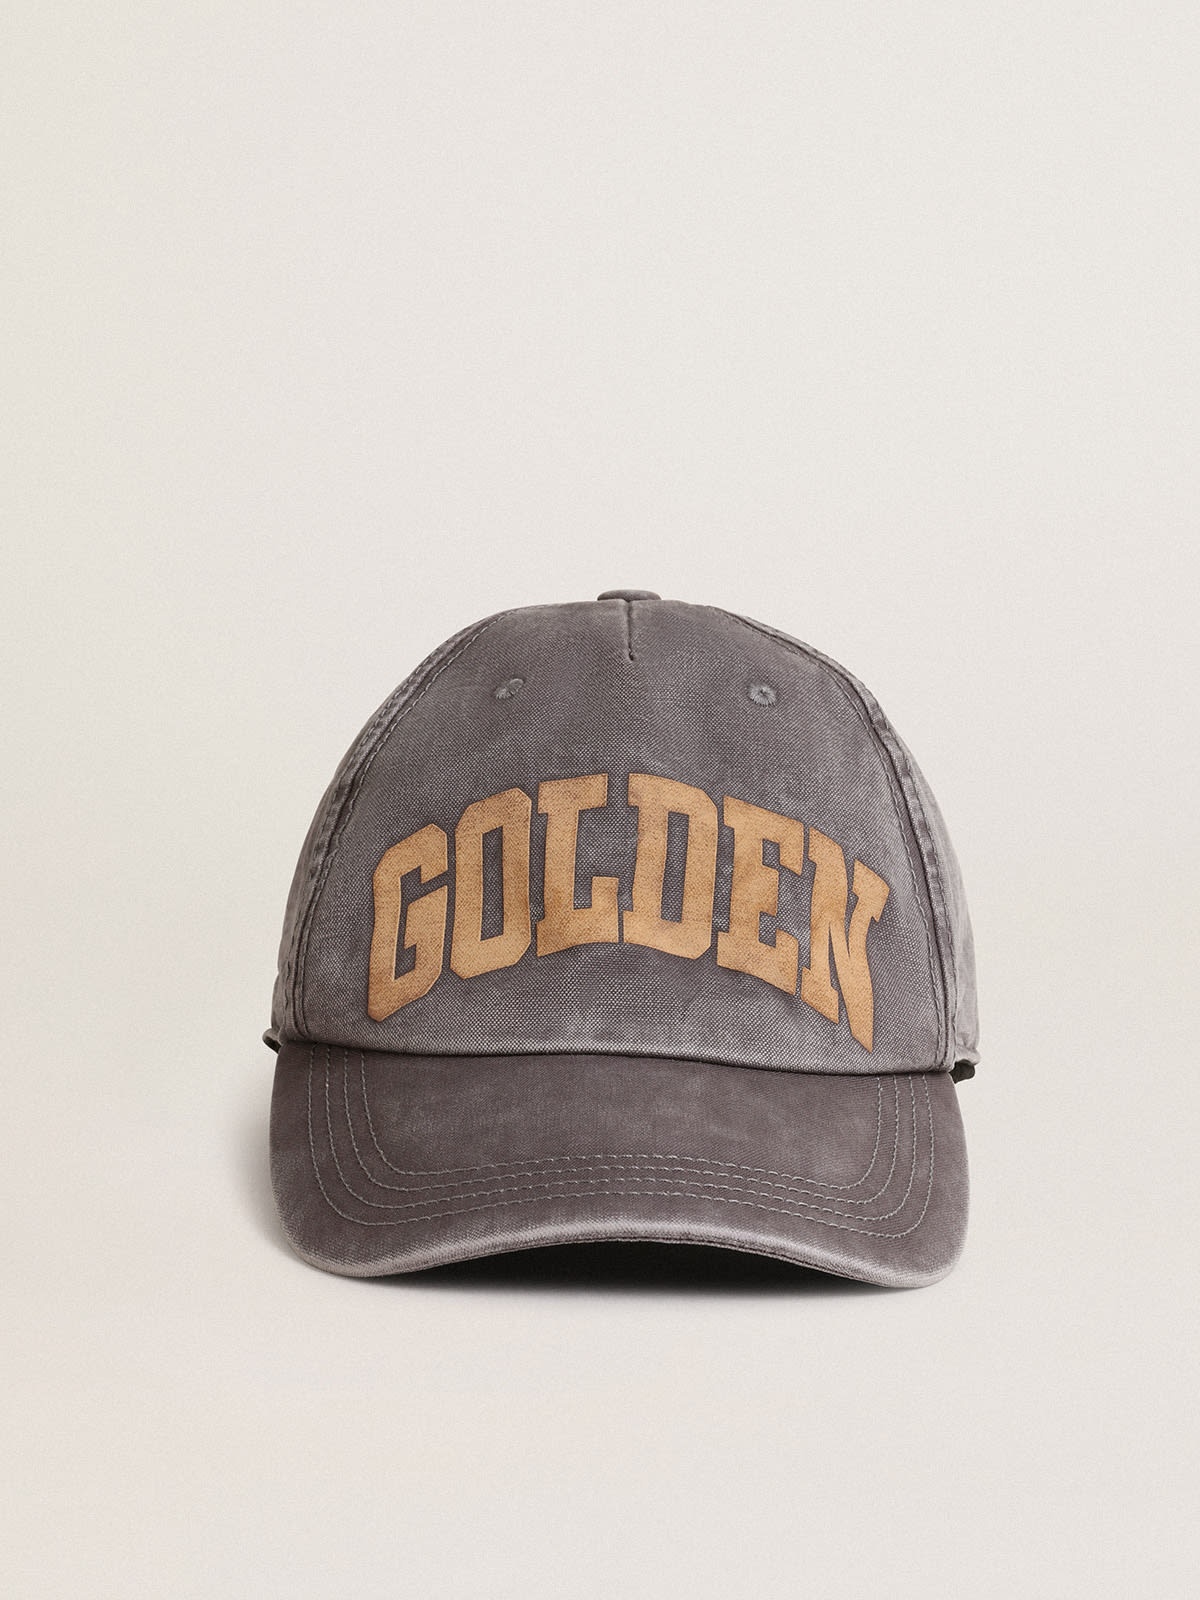 Hat in lilac-gray cotton with Golden lettering on the front - 1